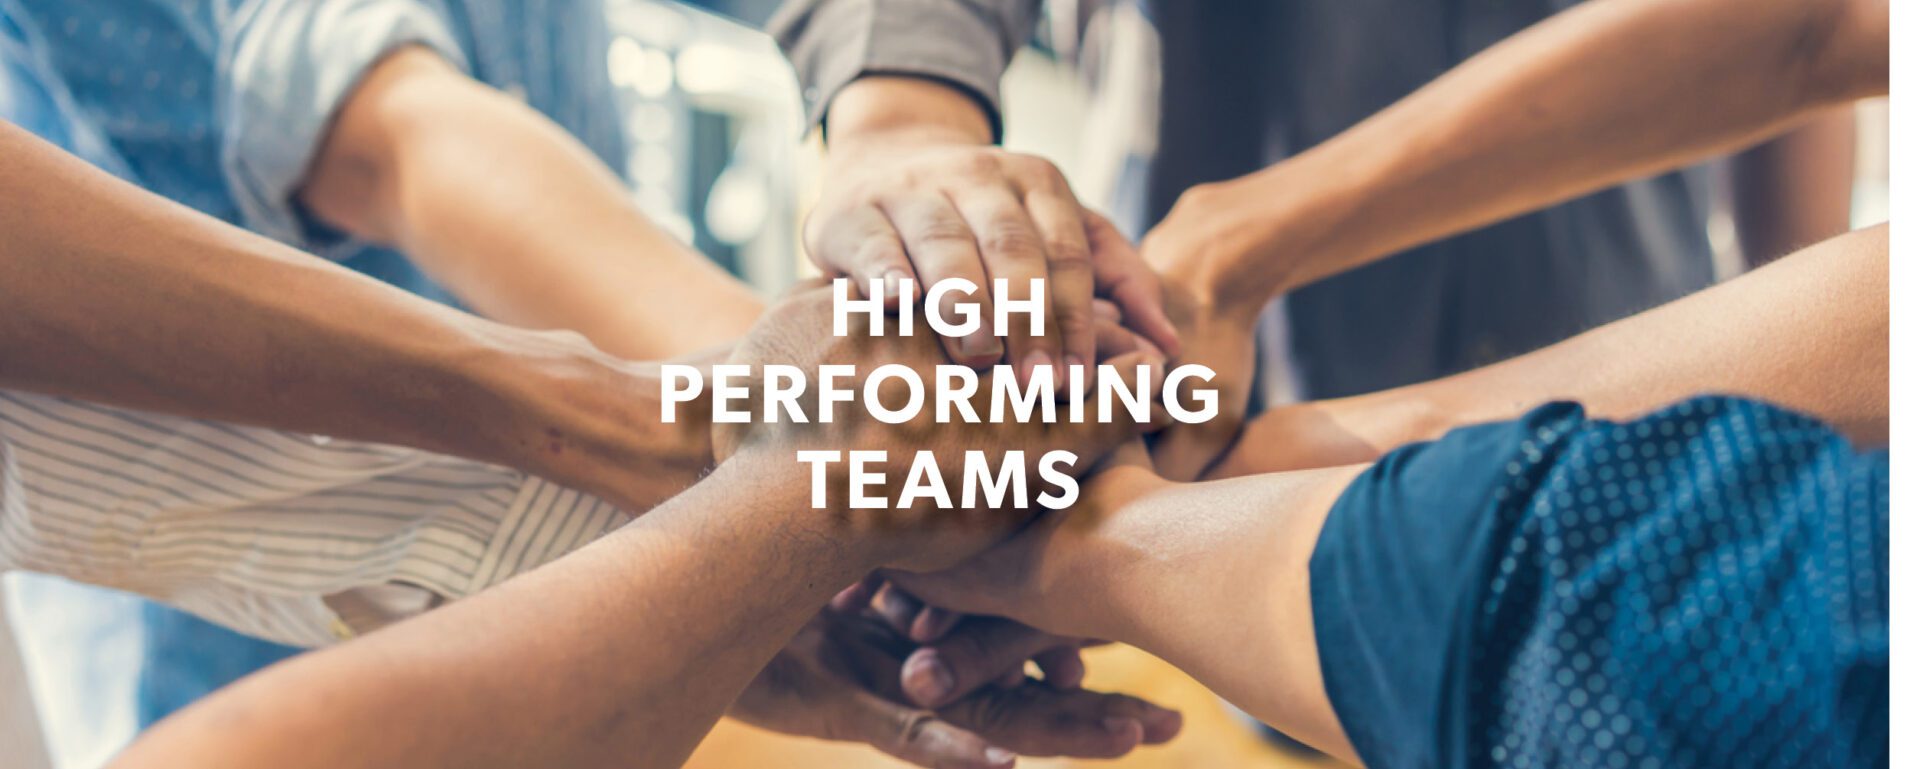 High Performing Teams banner with hands in the background